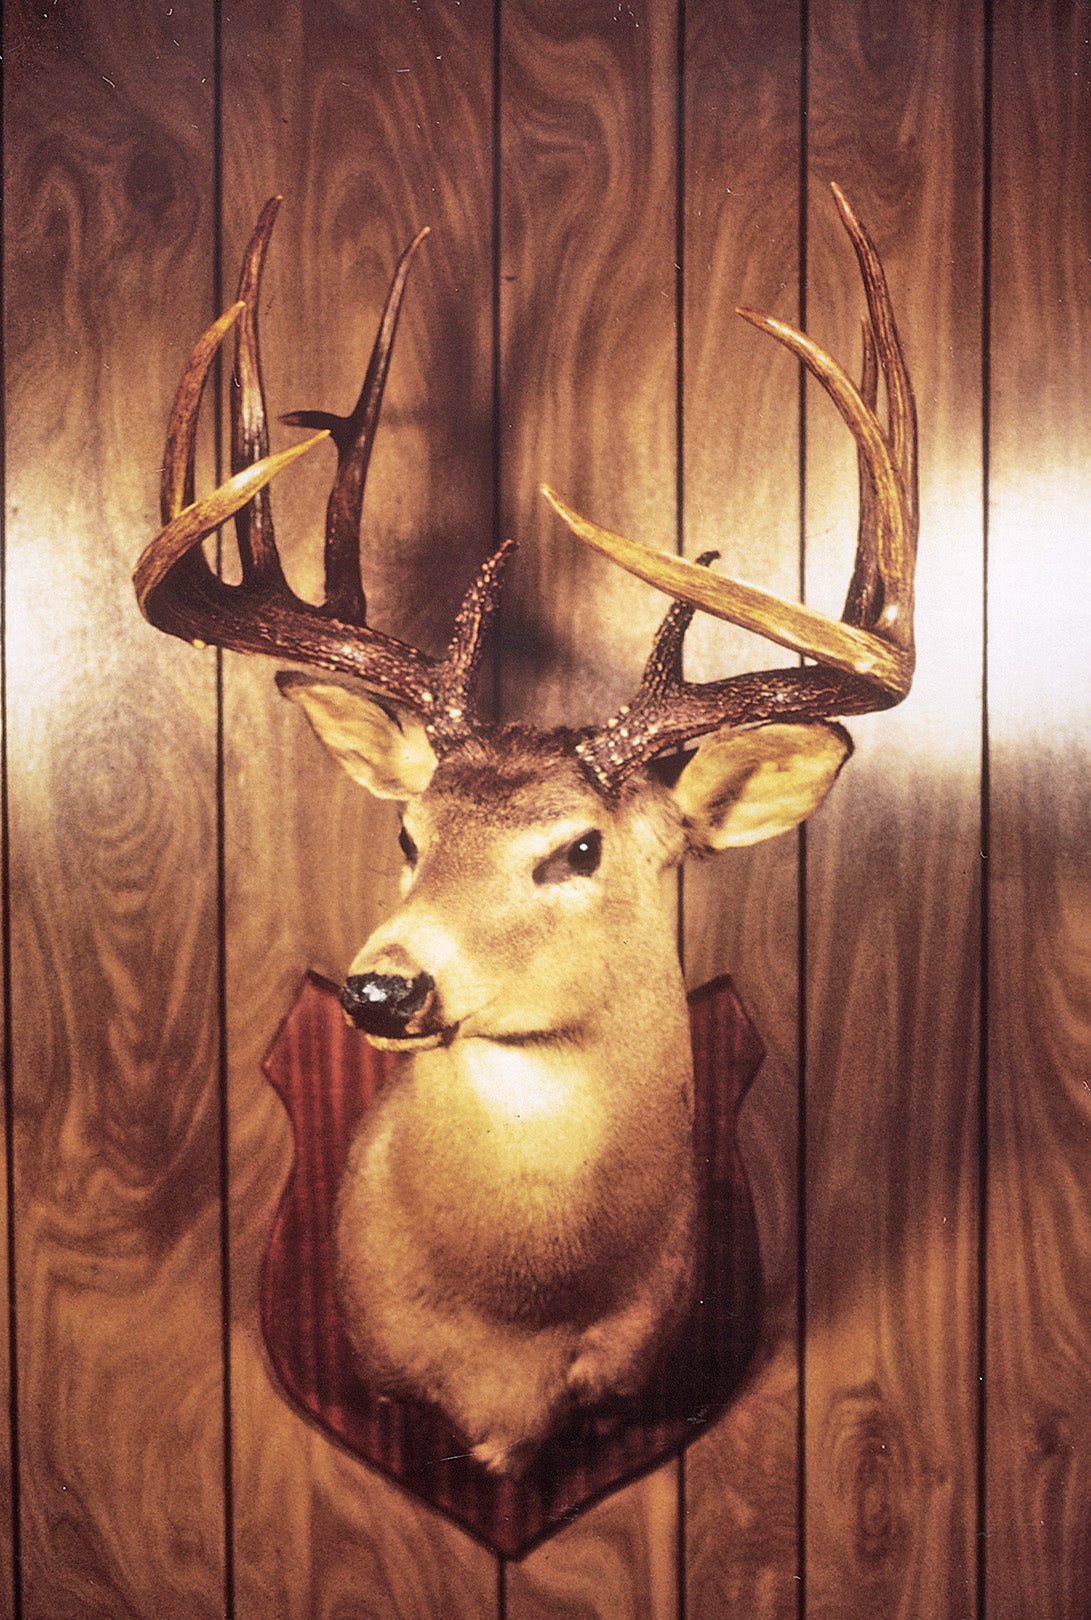 B&C record whitetail deer from Tennessee